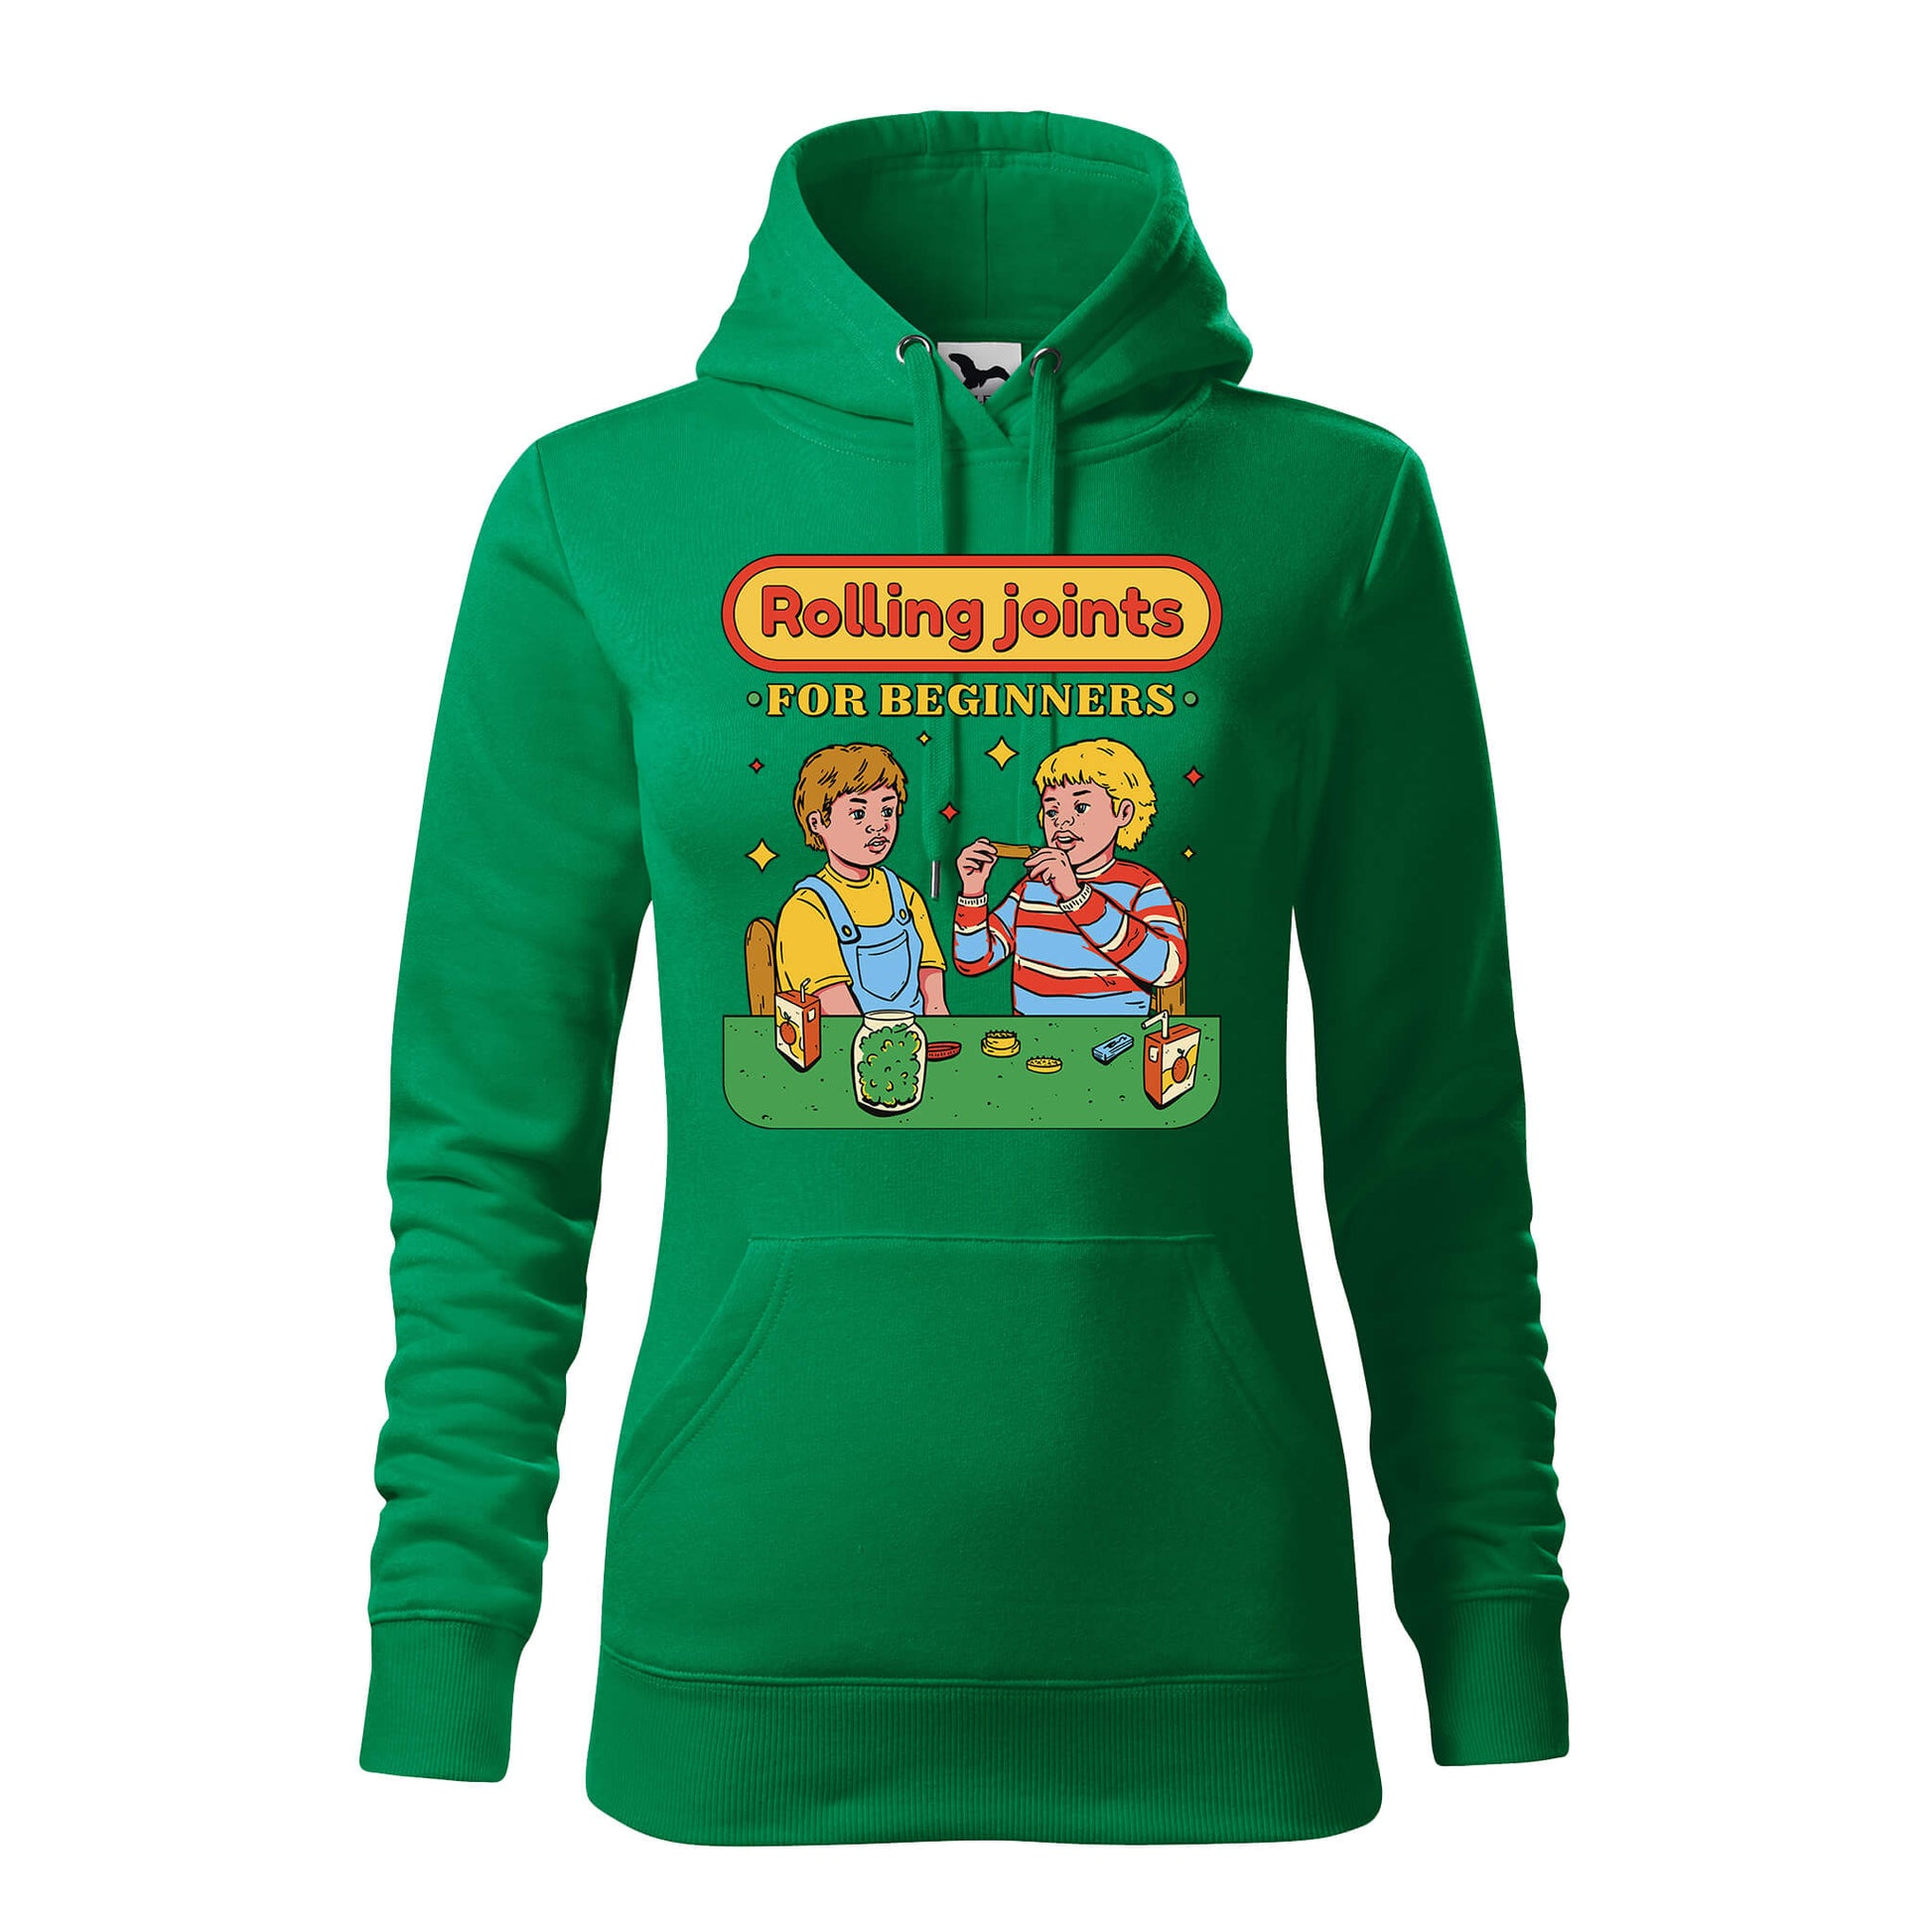 Rolling joints hoodie - rvdesignprint